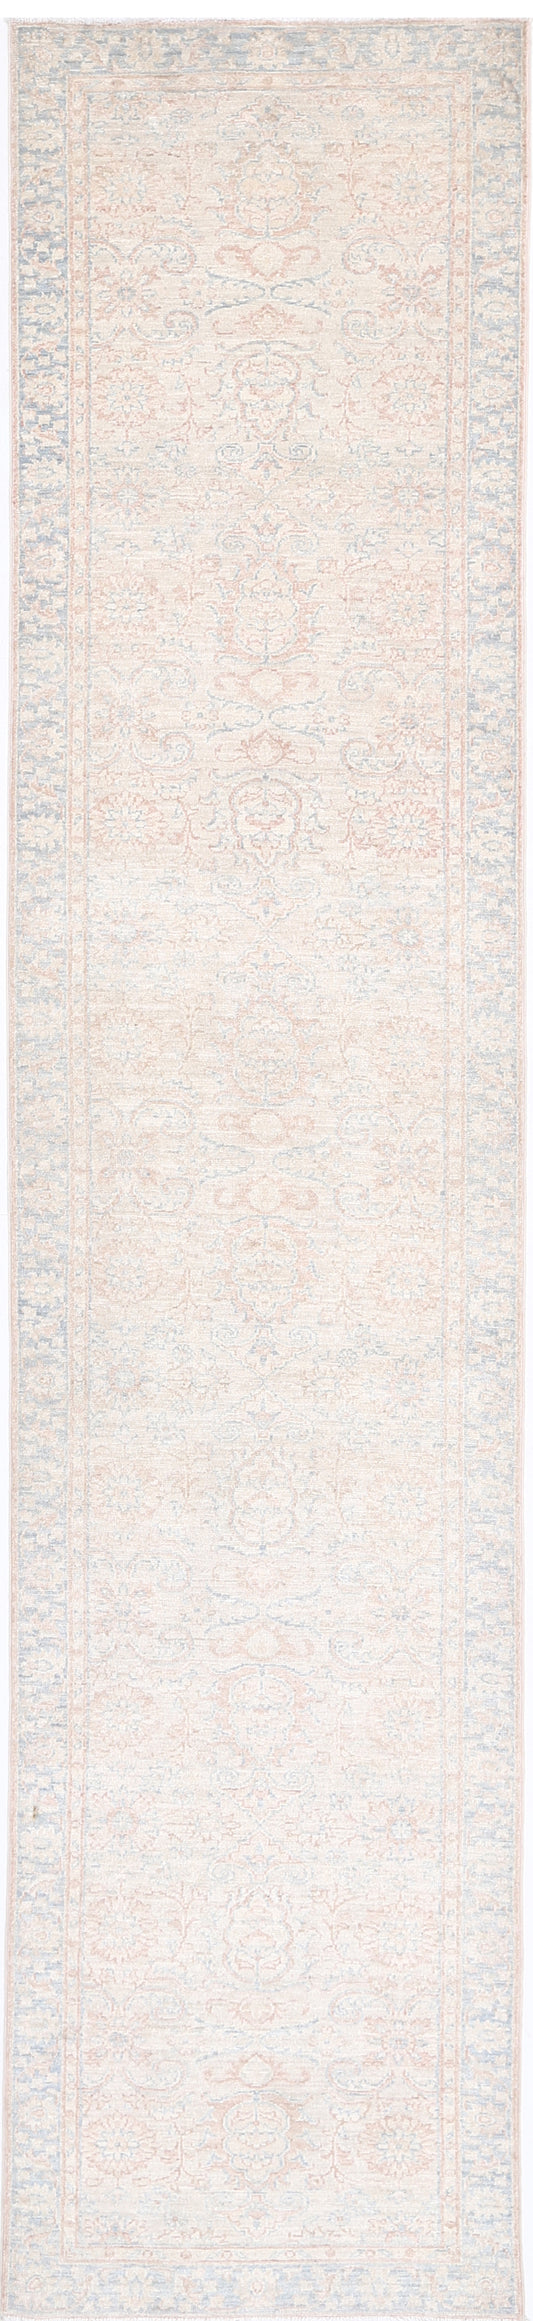 Traditional Hand Knotted Serenity Farhan Wool Rug of Size 2'5'' X 11'5'' in Ivory and Grey Colors - Made in Afghanistan